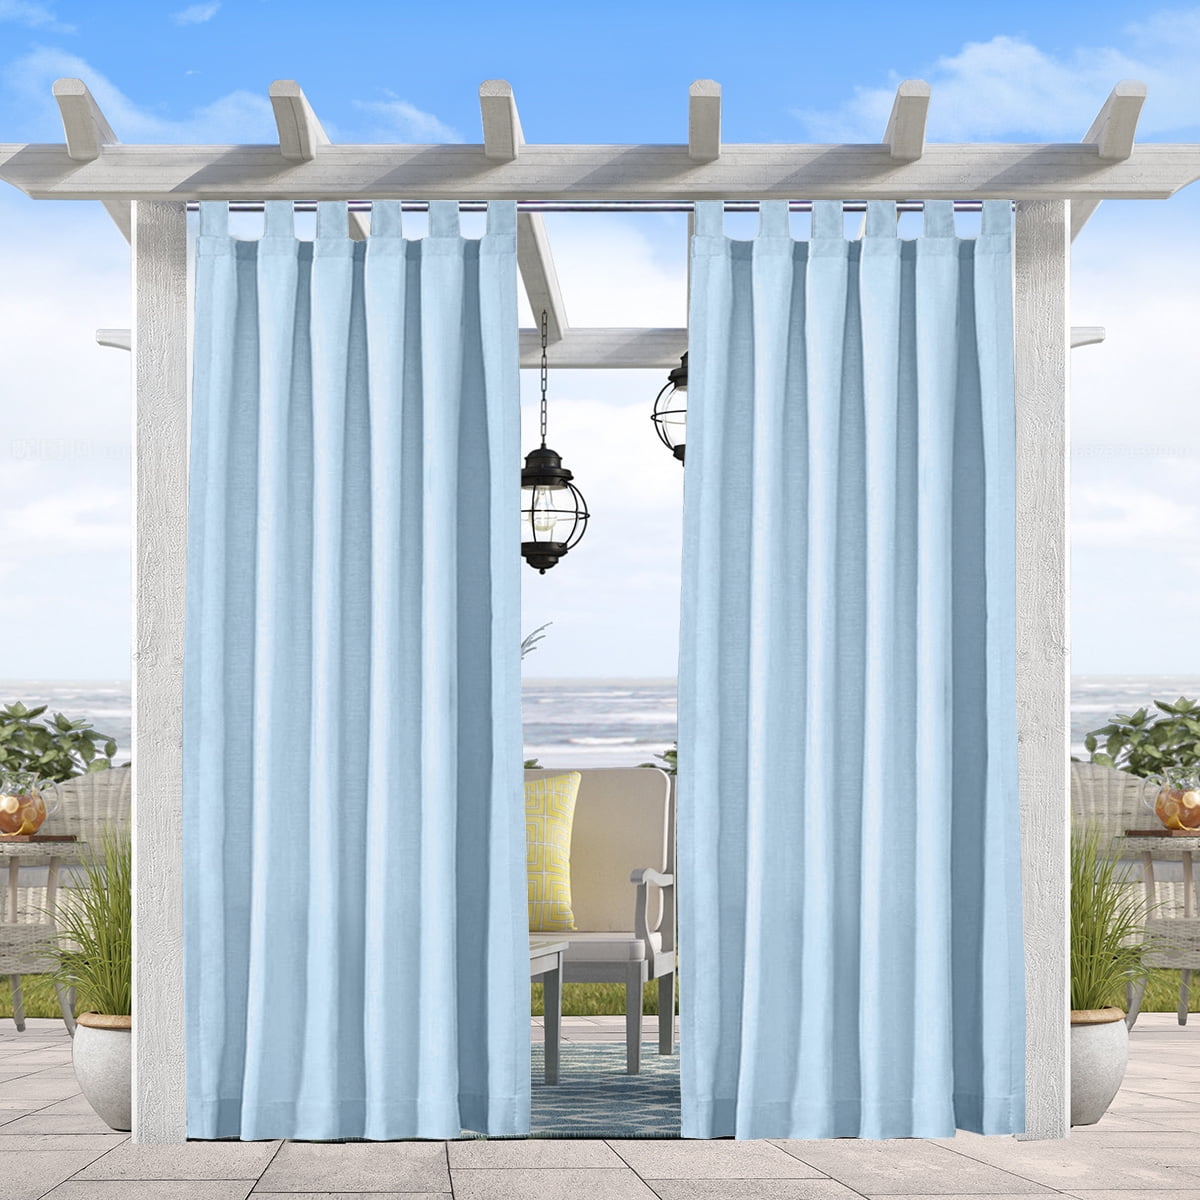 Home Cal Outdoor Curtain Panels Patio Privacy Screen,Velcor Curtain Panel Blackout UV Ray Protected Waterproof Outdoor Drape Front Porch,SkyBlue,50x108-Inch